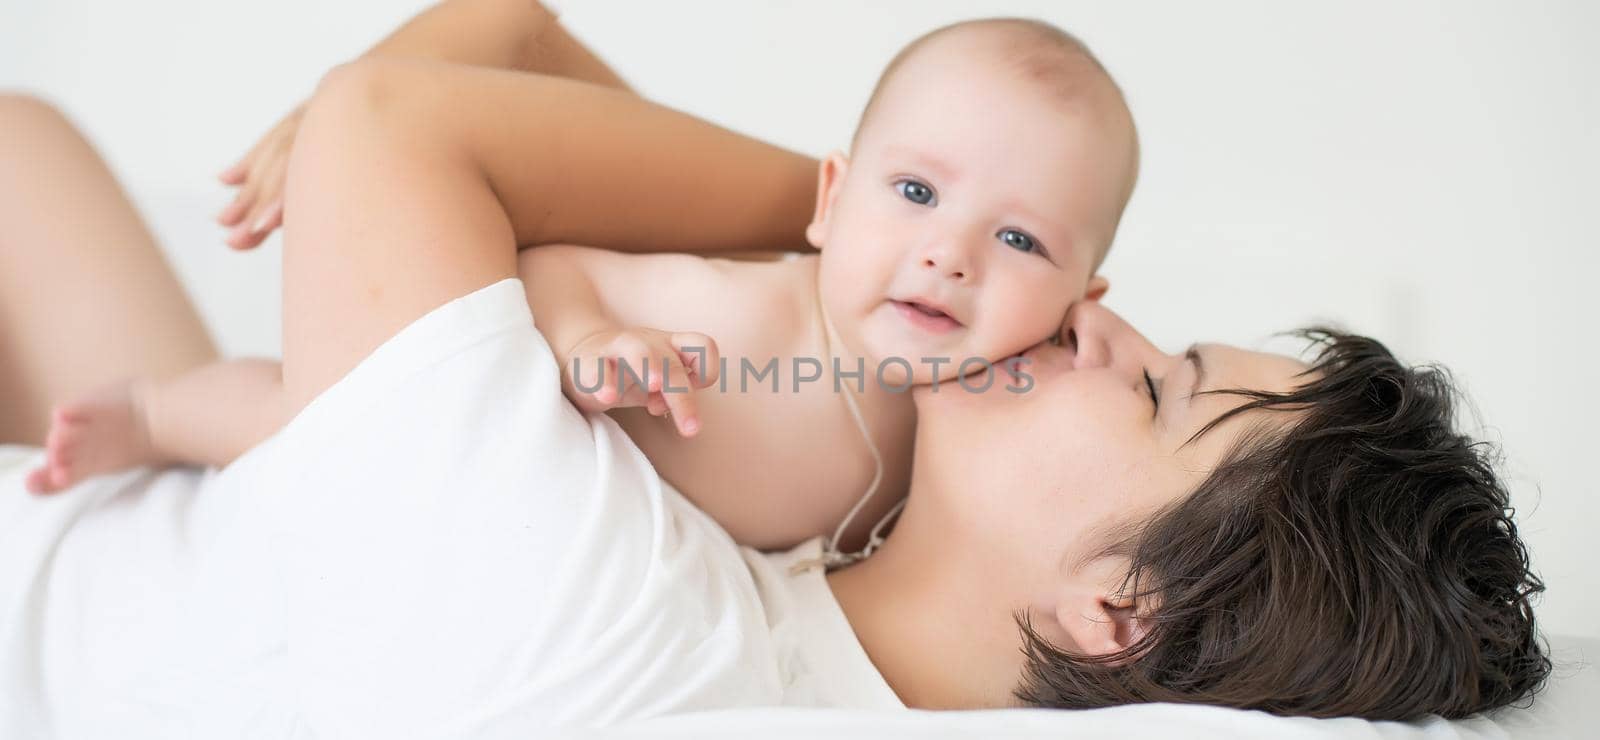 happy family. Mother and baby playing and smiling on bed by Andelov13